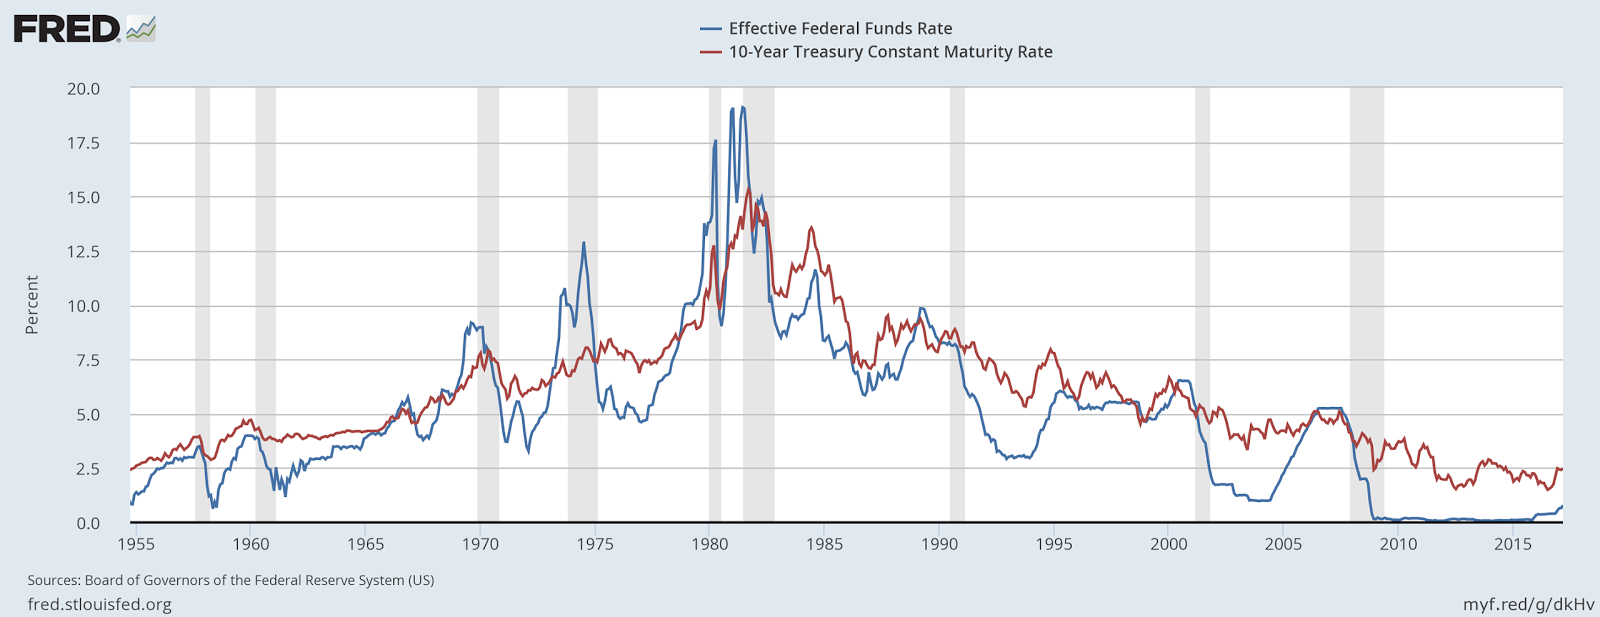 Fred Interest Rates Chart